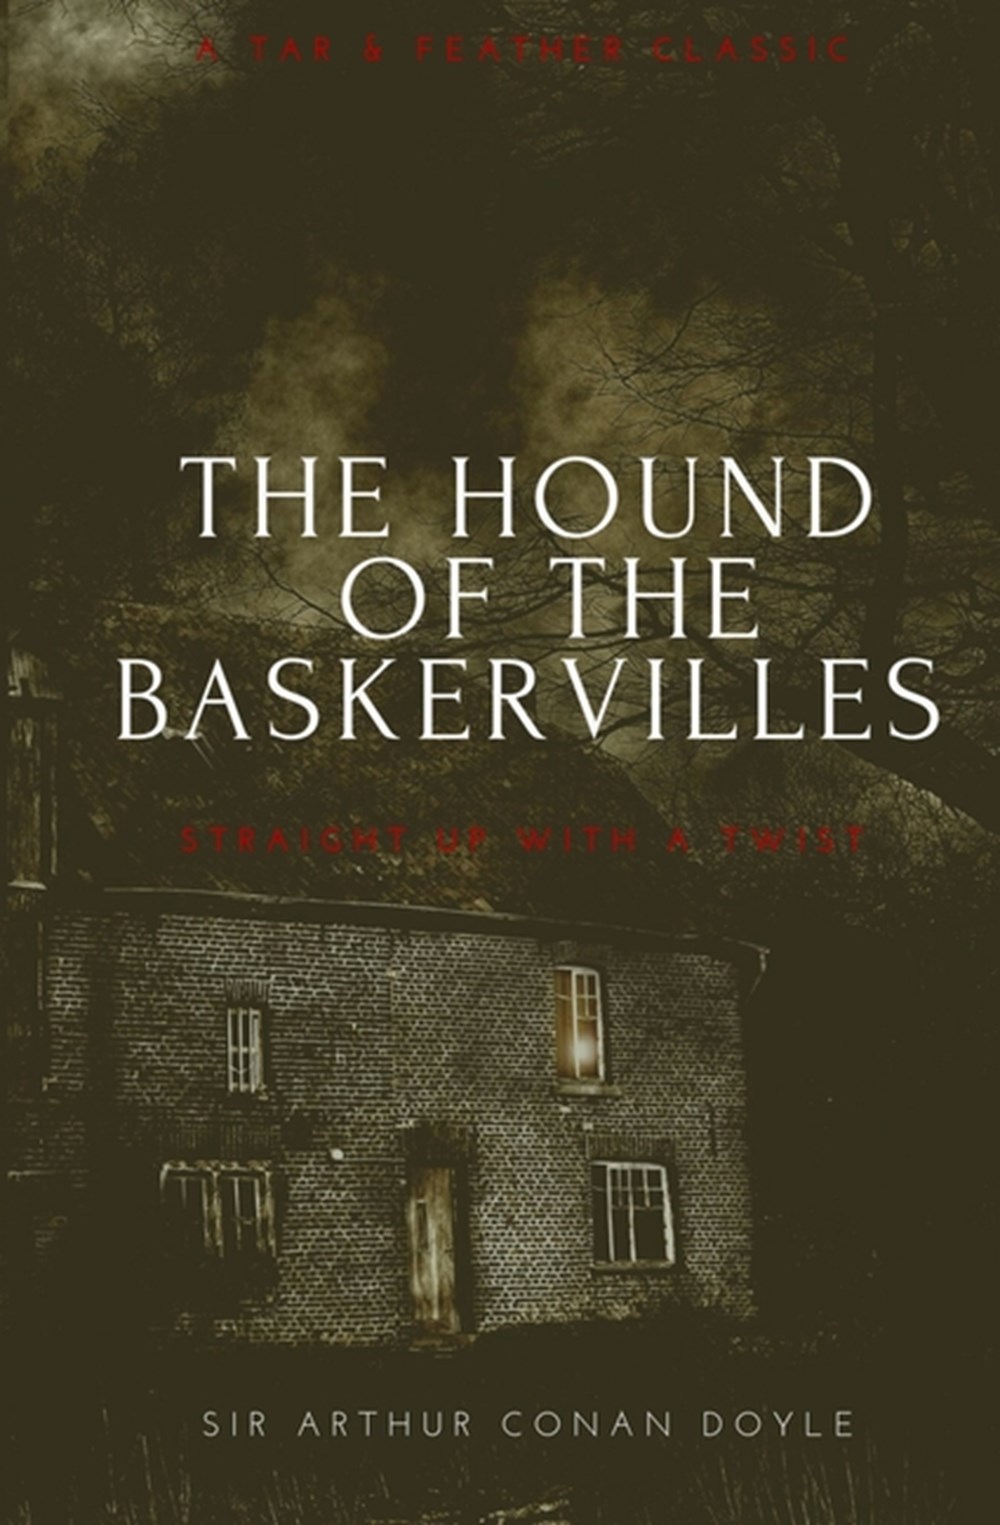 Hound of the Baskervilles (Annotated) A Tar & Feather Classic: Straight Up With a Twist